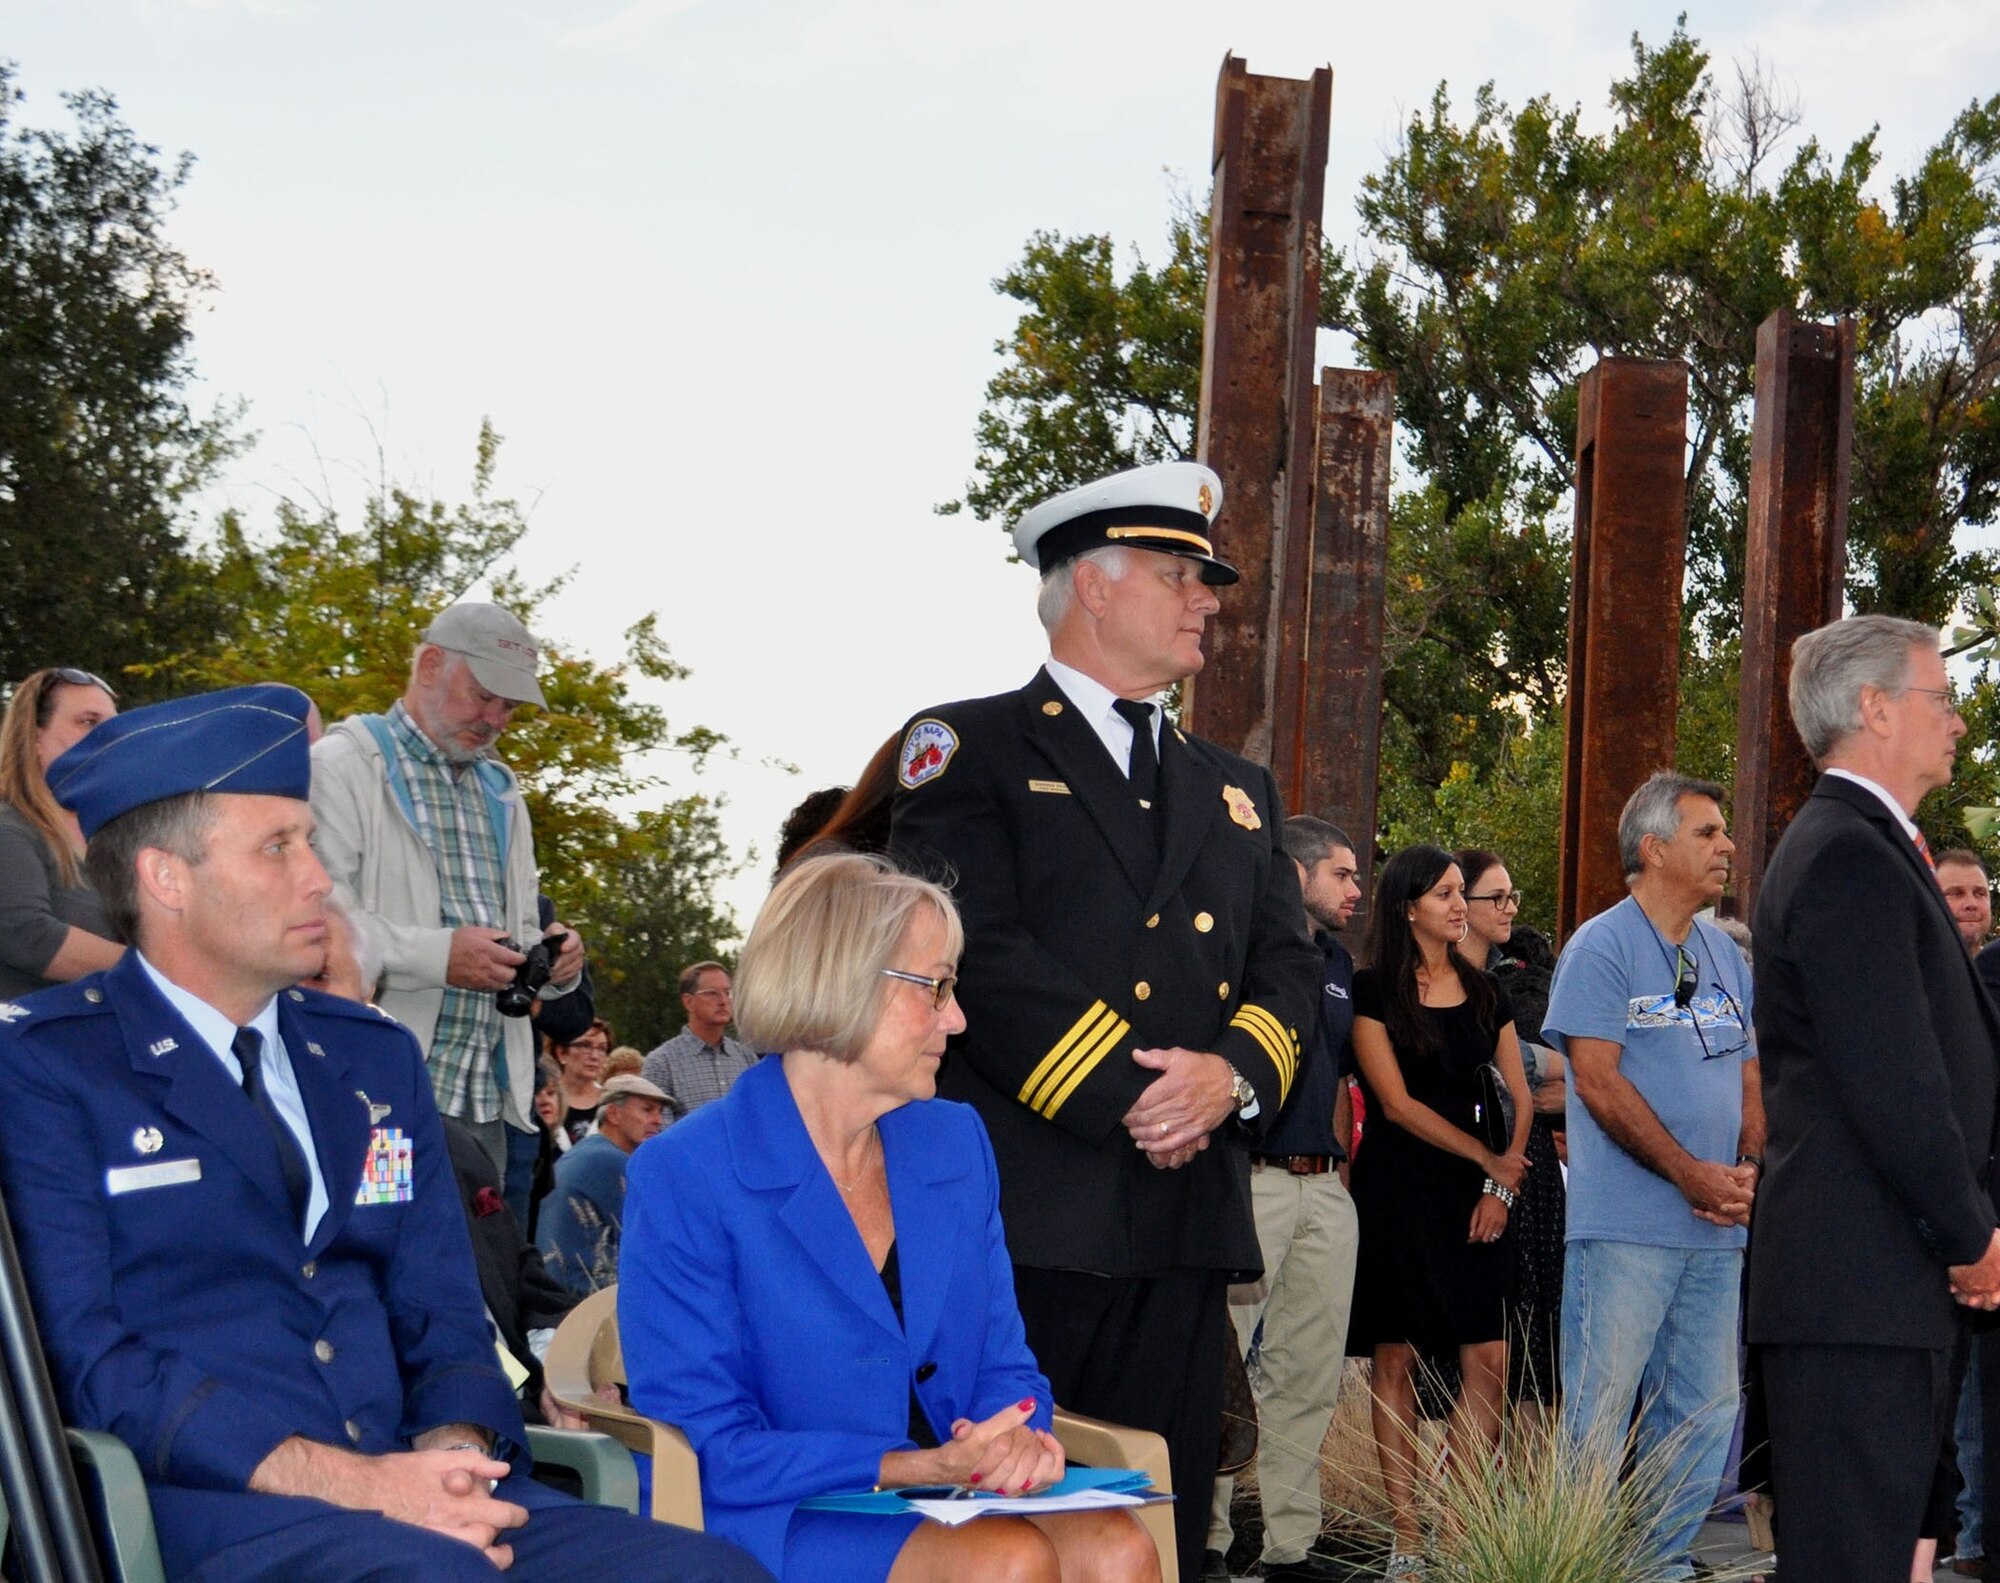 TRAVIS AIR FORCE BASE, Calif. -- The Napa Memorial Garden was dedicated downtown. Attending the dedication was Col. Matthew Burger, commander of the Reserve's 349th Air Mobility Wing, Travis Air Force Base, Calif. Here, he is seated next to his Honorary Commander, the Mayor of Napa, the Honorable Jill Techel. Standing behind the Mayor is Napa Fire Marshal Darren Drake, who is responsible for getting the project started when he asked for one beam from the World Trade Center twin towers. He and Napa artist Gordon Huether, who designed the sculptural part of the garden, were given five beams. Four of the 24-foot tall steel beams can be seen here, with other smaller beams throughout the garden. Huether designed four panels of glass that stand at its center. With the largest reaching more than 14 feet into the air, the panels display the names of every victim, with one telling the story of that fateful day, and also explaining why Napa built this memorial. More than 500 people attended the dedication. (U.S. Air Force photo/Ellen Hatfield)